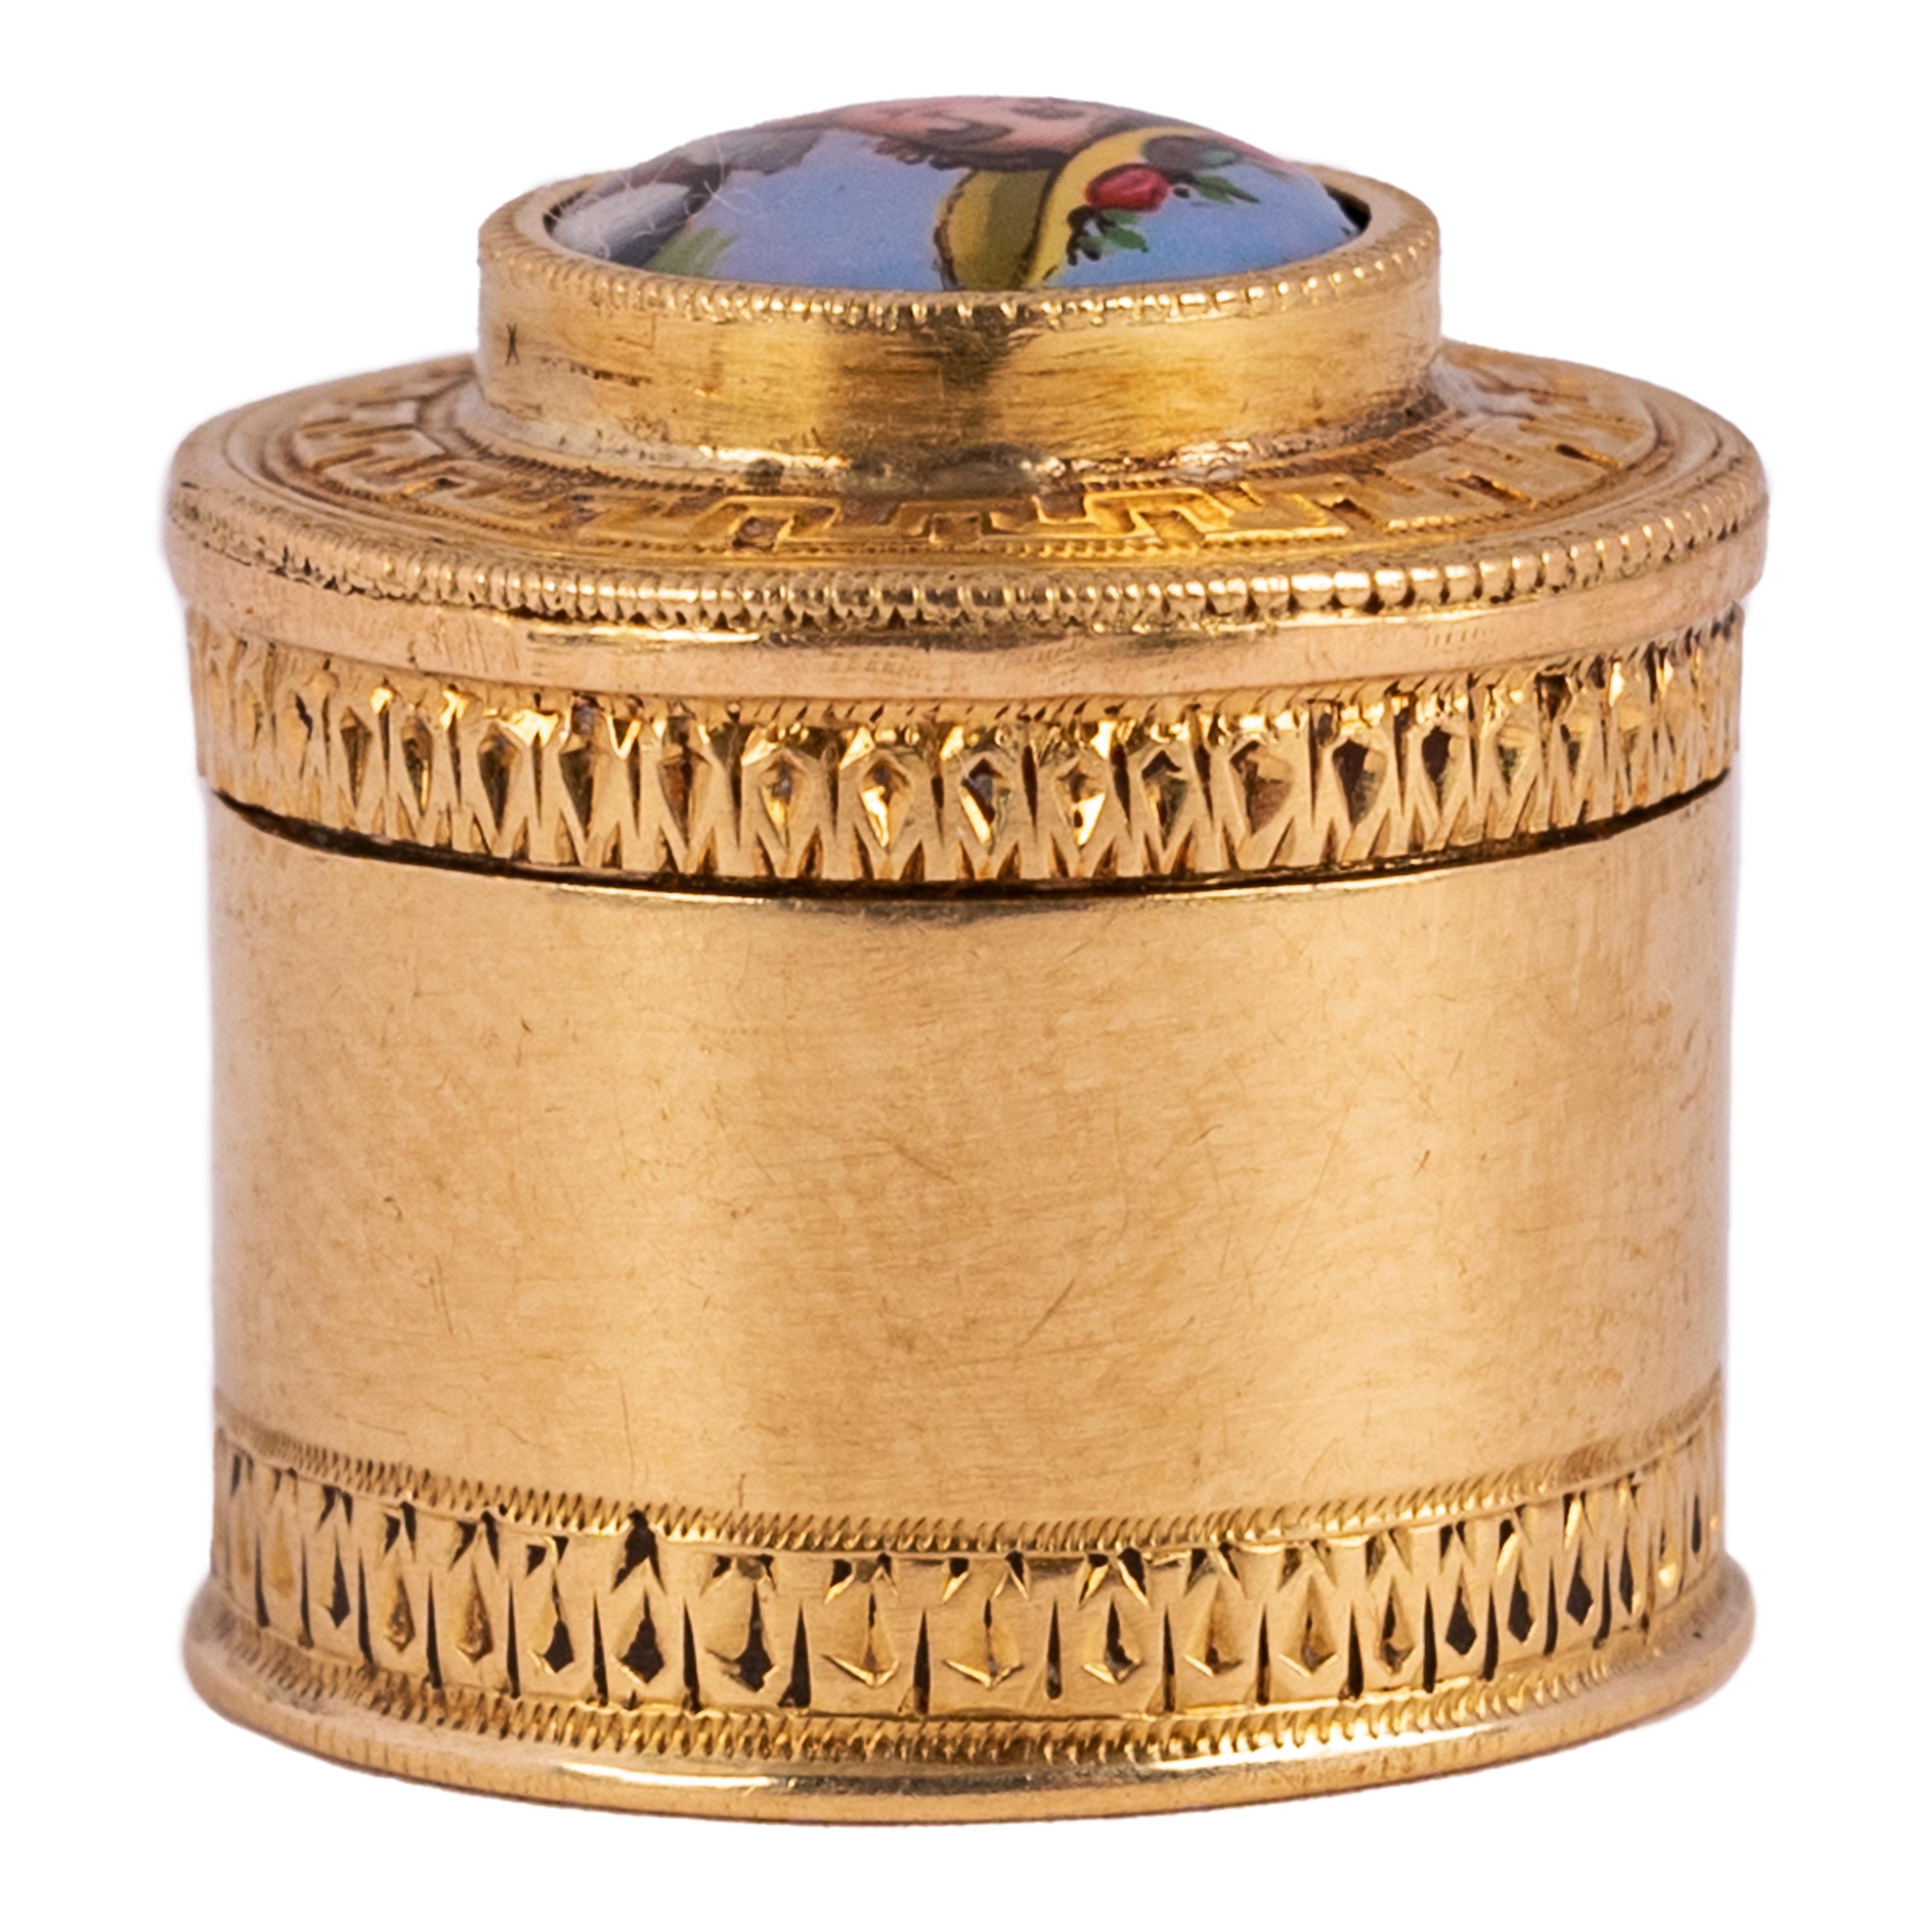 An antique French miniature 18k gold and enamel lidded patch box, circa 1780.
Patch boxes were used from the late 1600s to the early 1800s to store small black gummed silk patches of various shapes, which would be worn as beauty spots by both